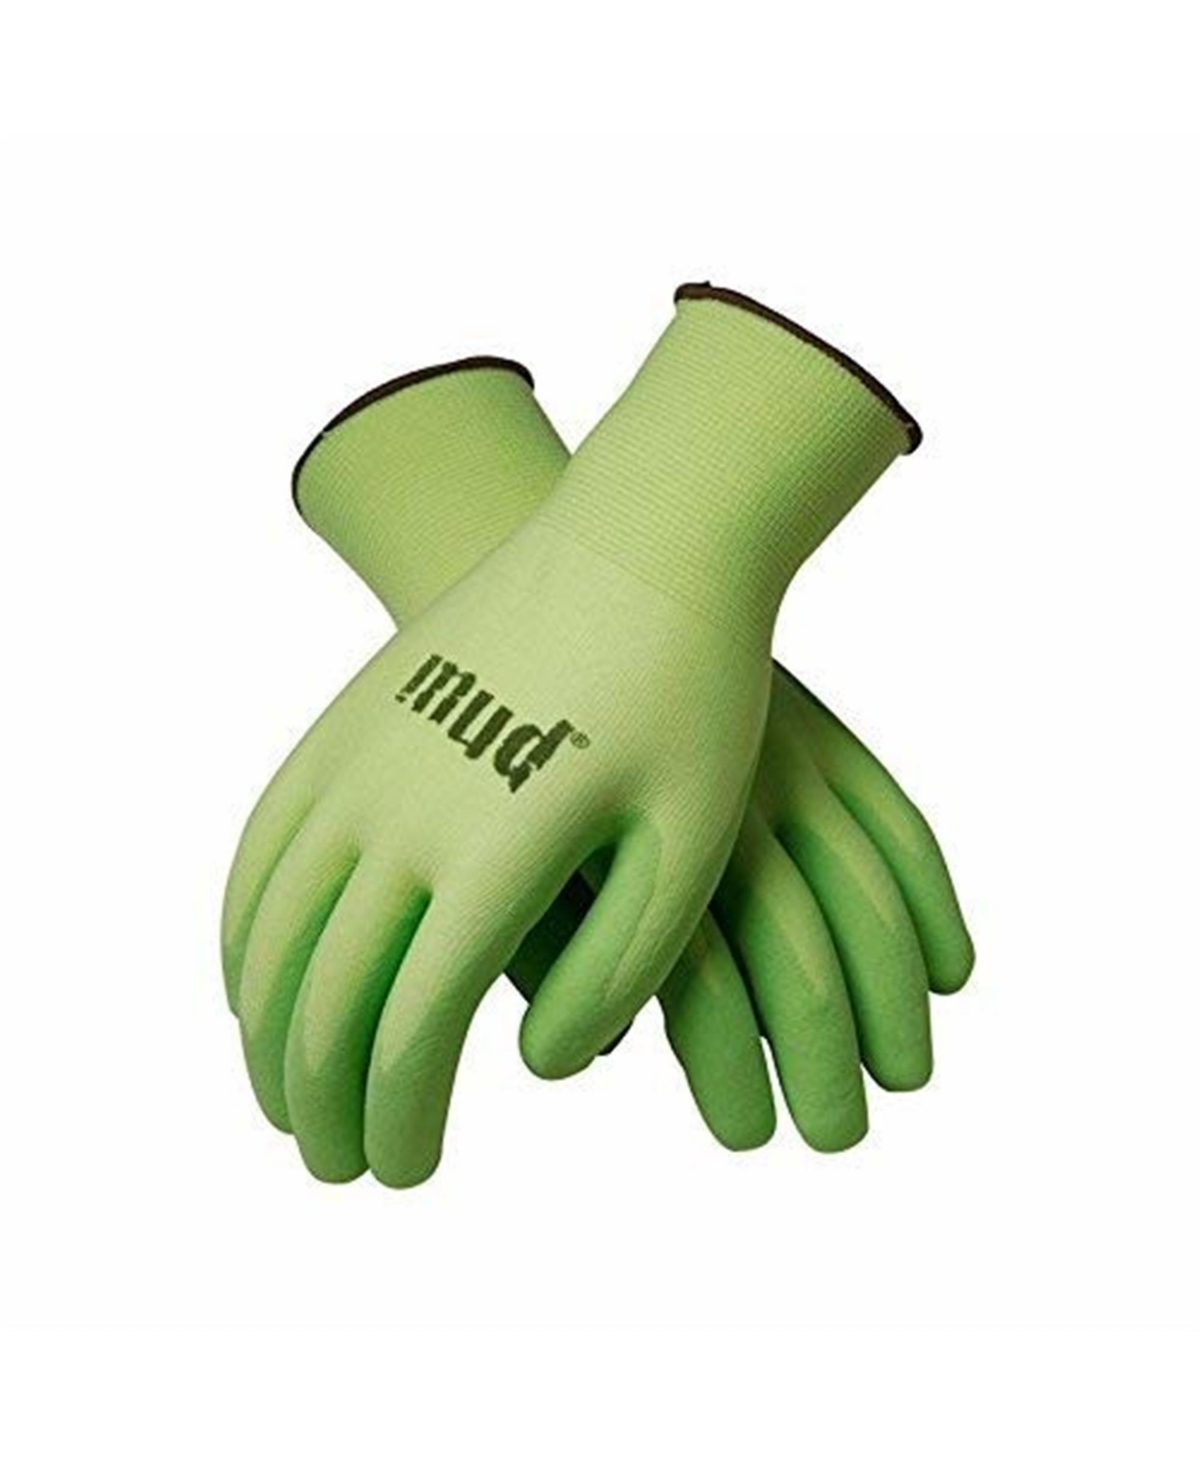 Simply Mud Gloves, Green Size L - Green